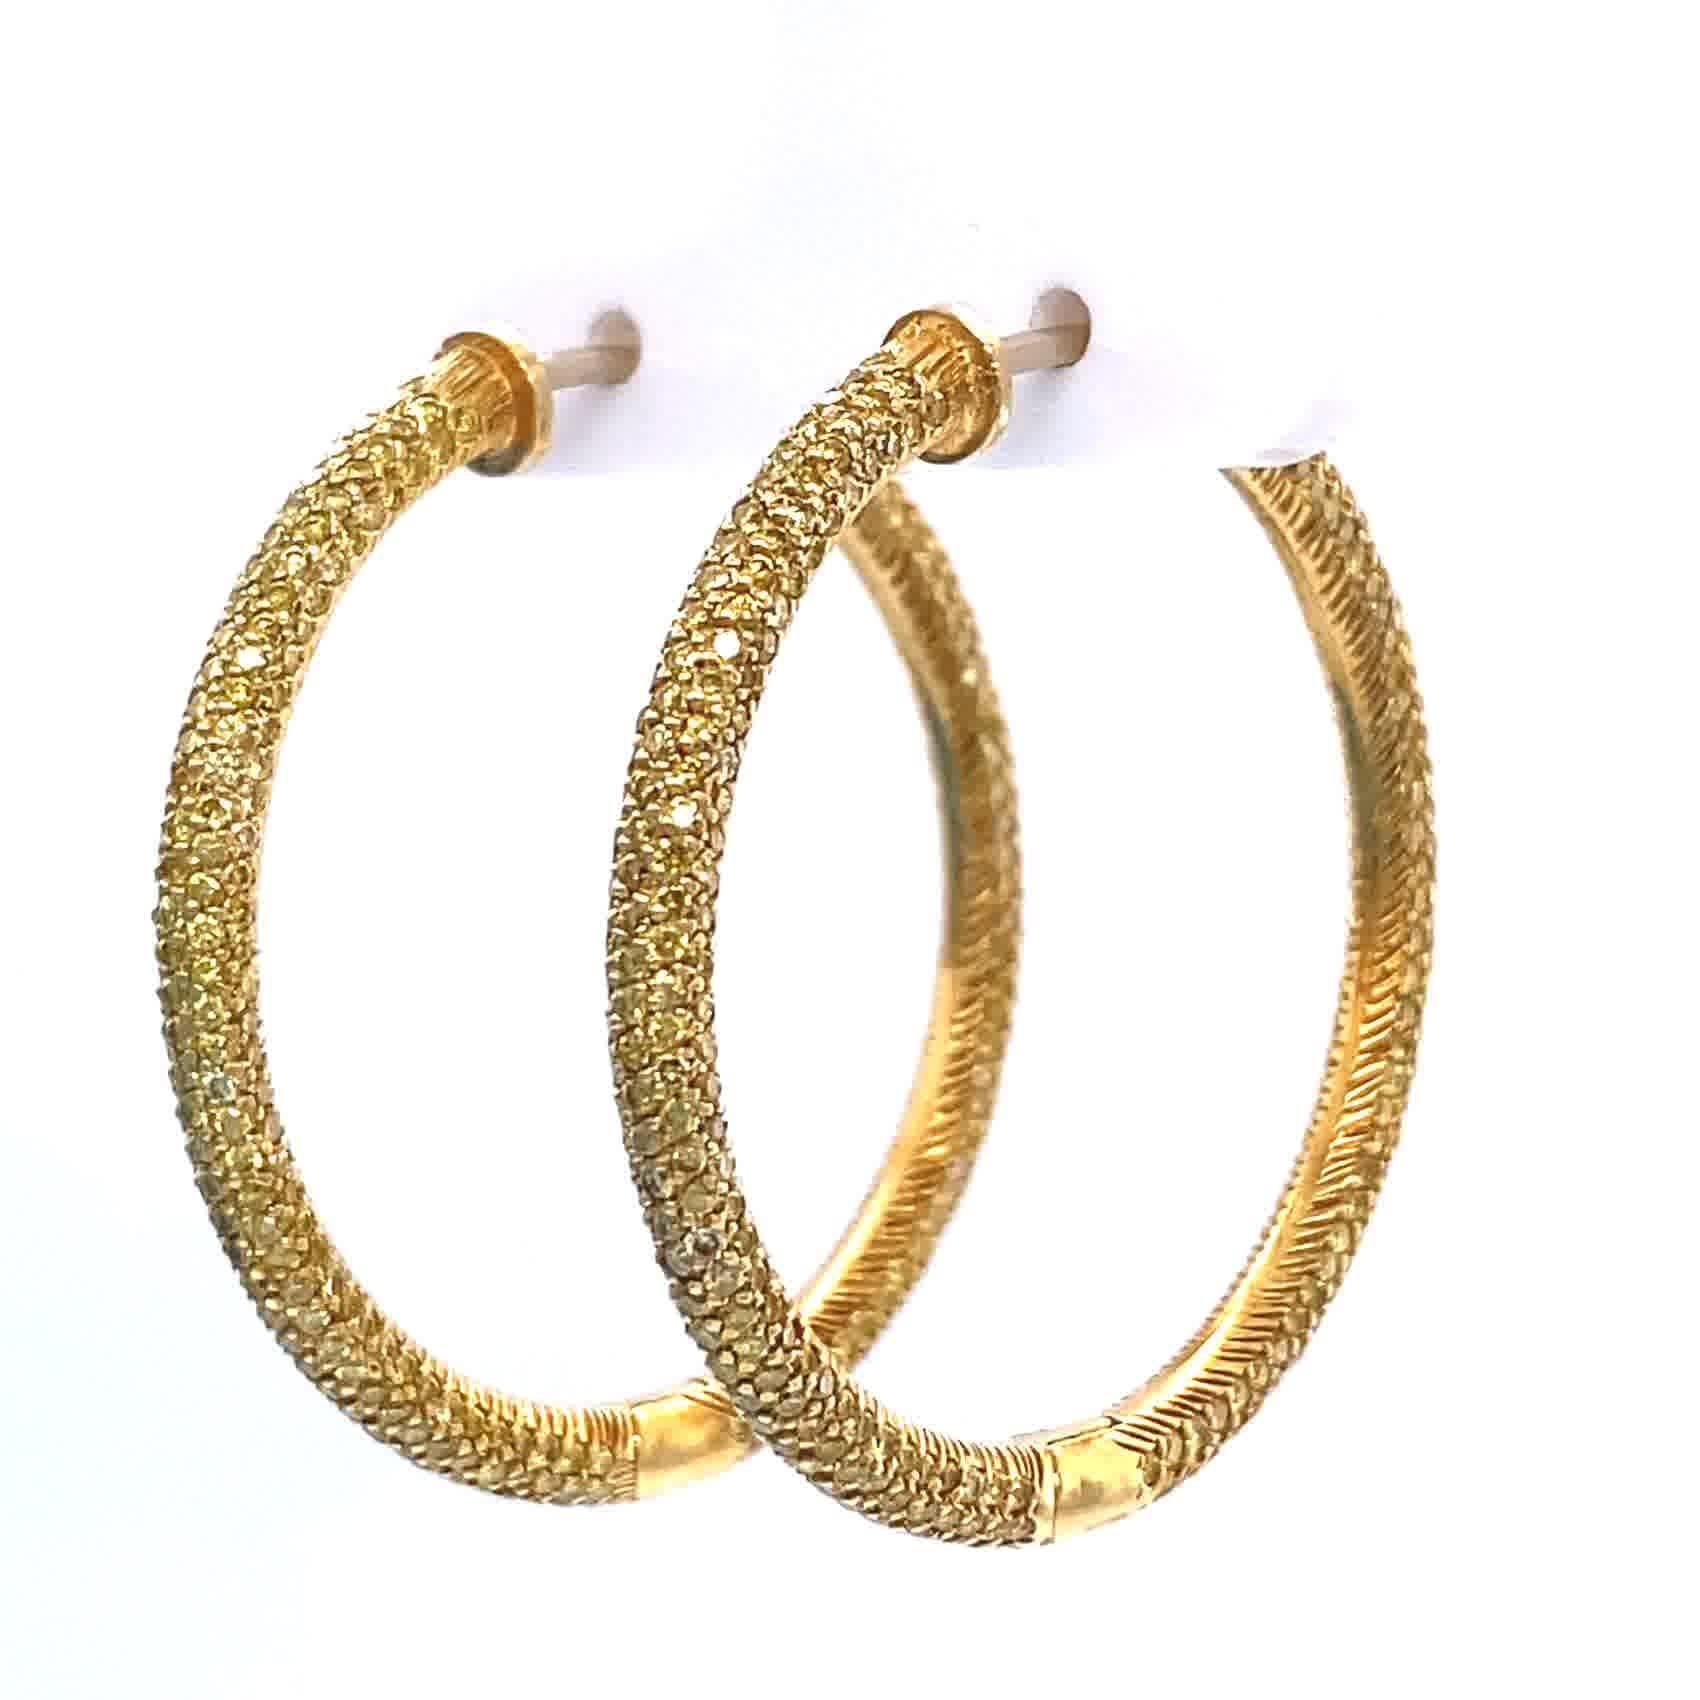 If you like to stand out from the crowd and own something truly unique, these Vintage Yellow Diamond 18k Gold Hoop Earrings are for you! They feature 700 round brilliant cut fancy yellow diamonds weighing approximately 5.00 carat. Fancy yellow